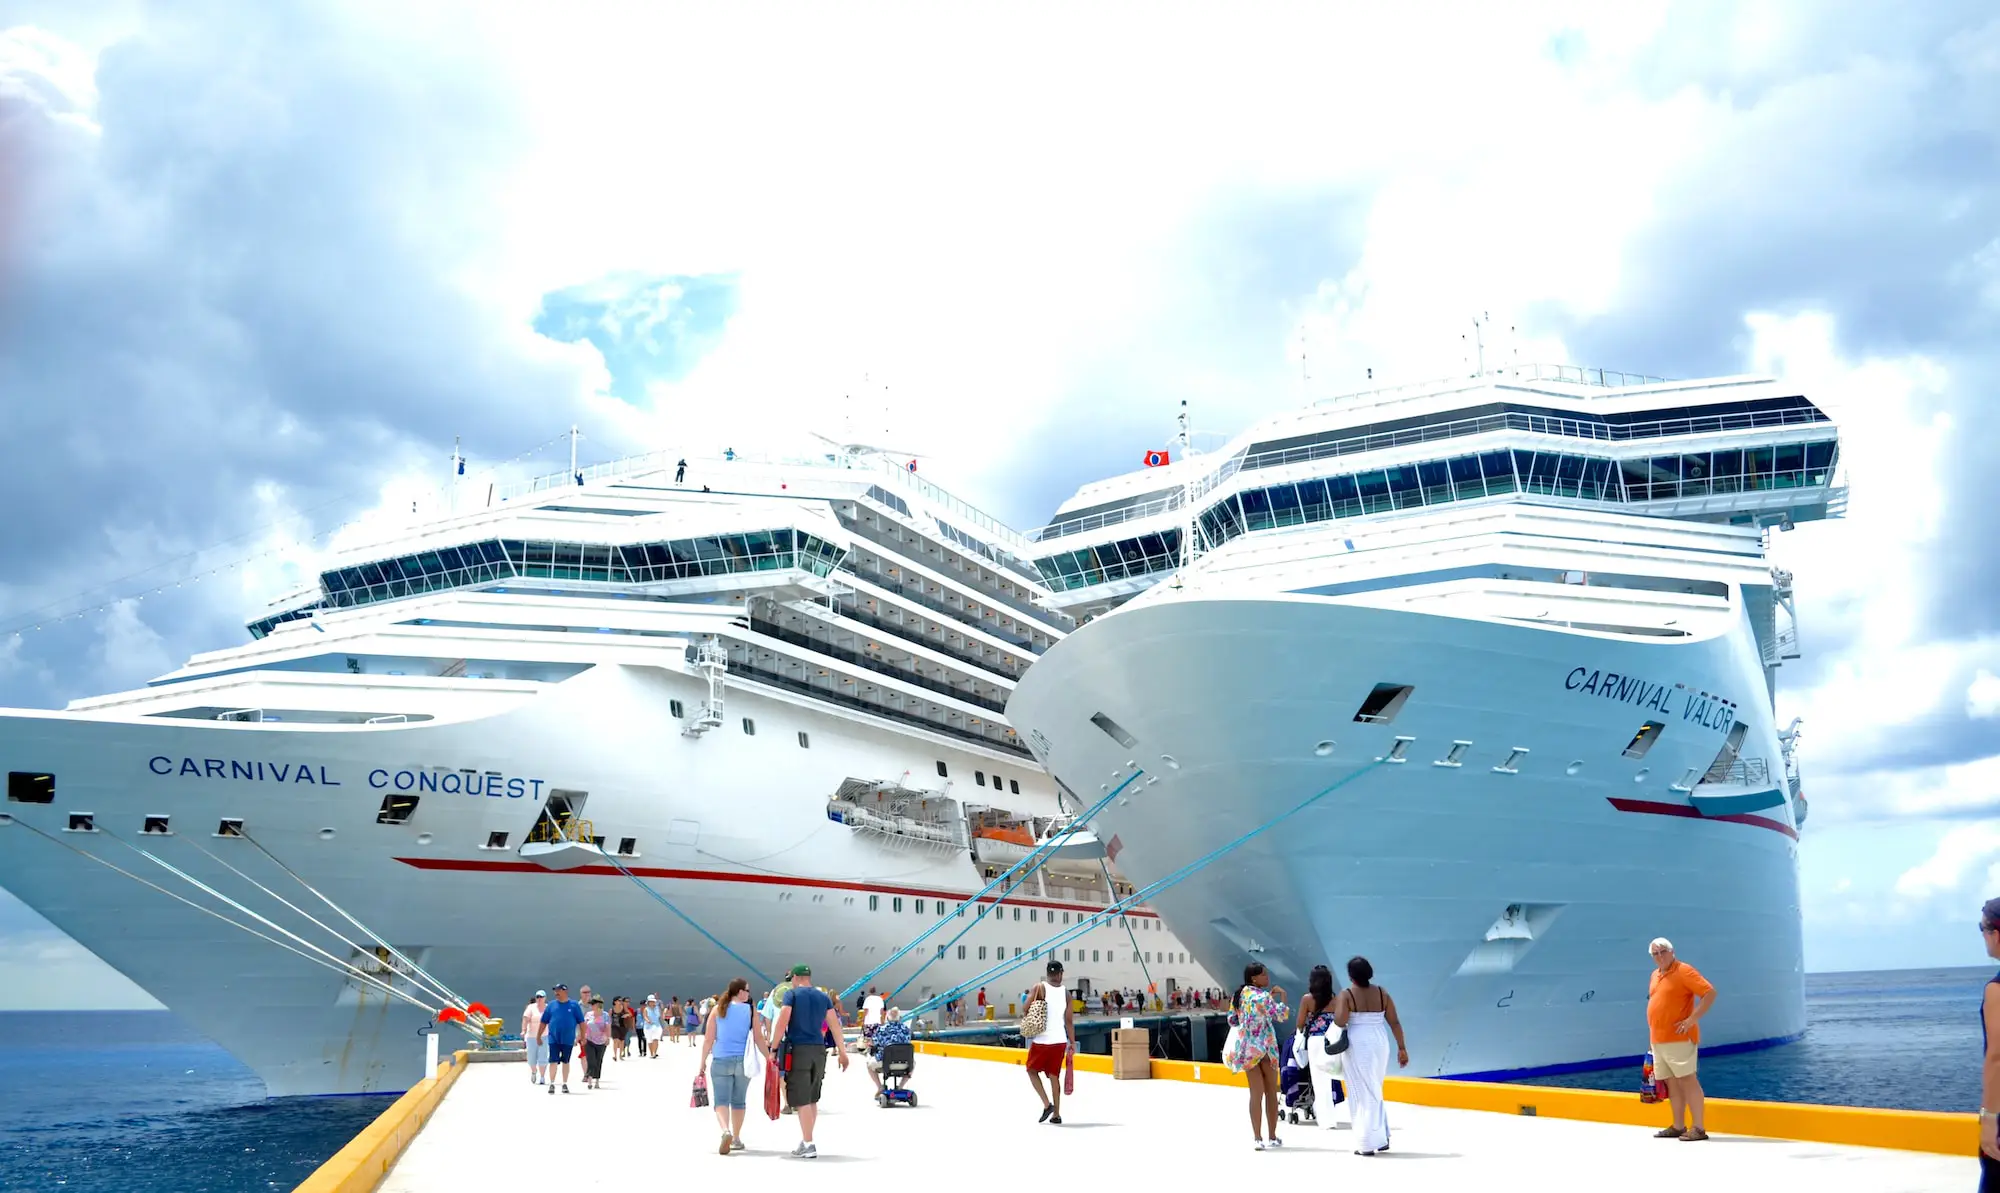 Top 5 Must-Have Features in a Digital Wallet App for the Cruise Line Industry